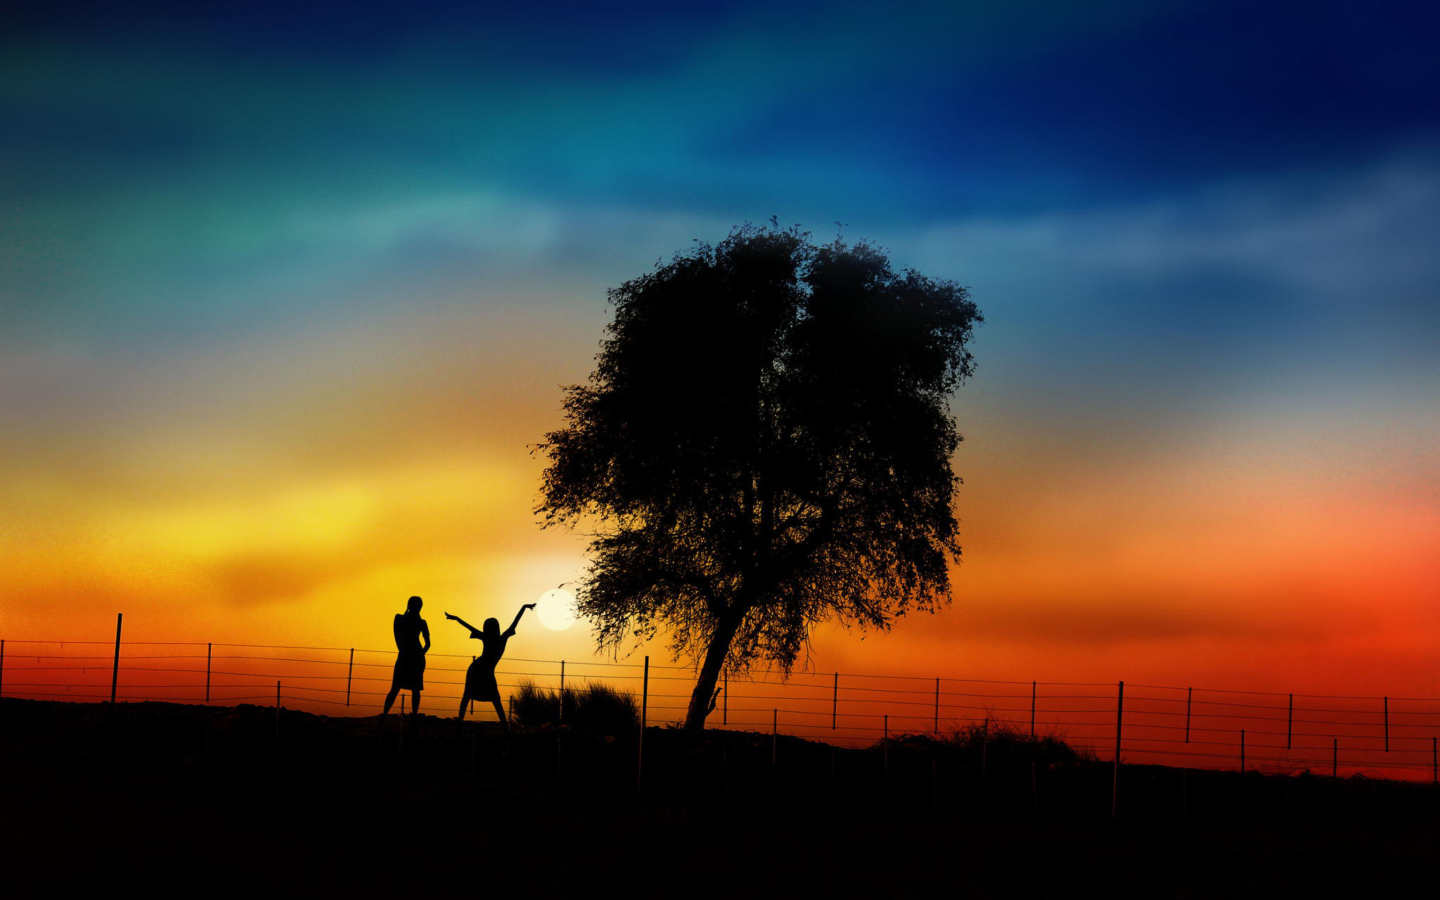 Das Couple Silhouettes Under Tree At Sunset Wallpaper 1440x900